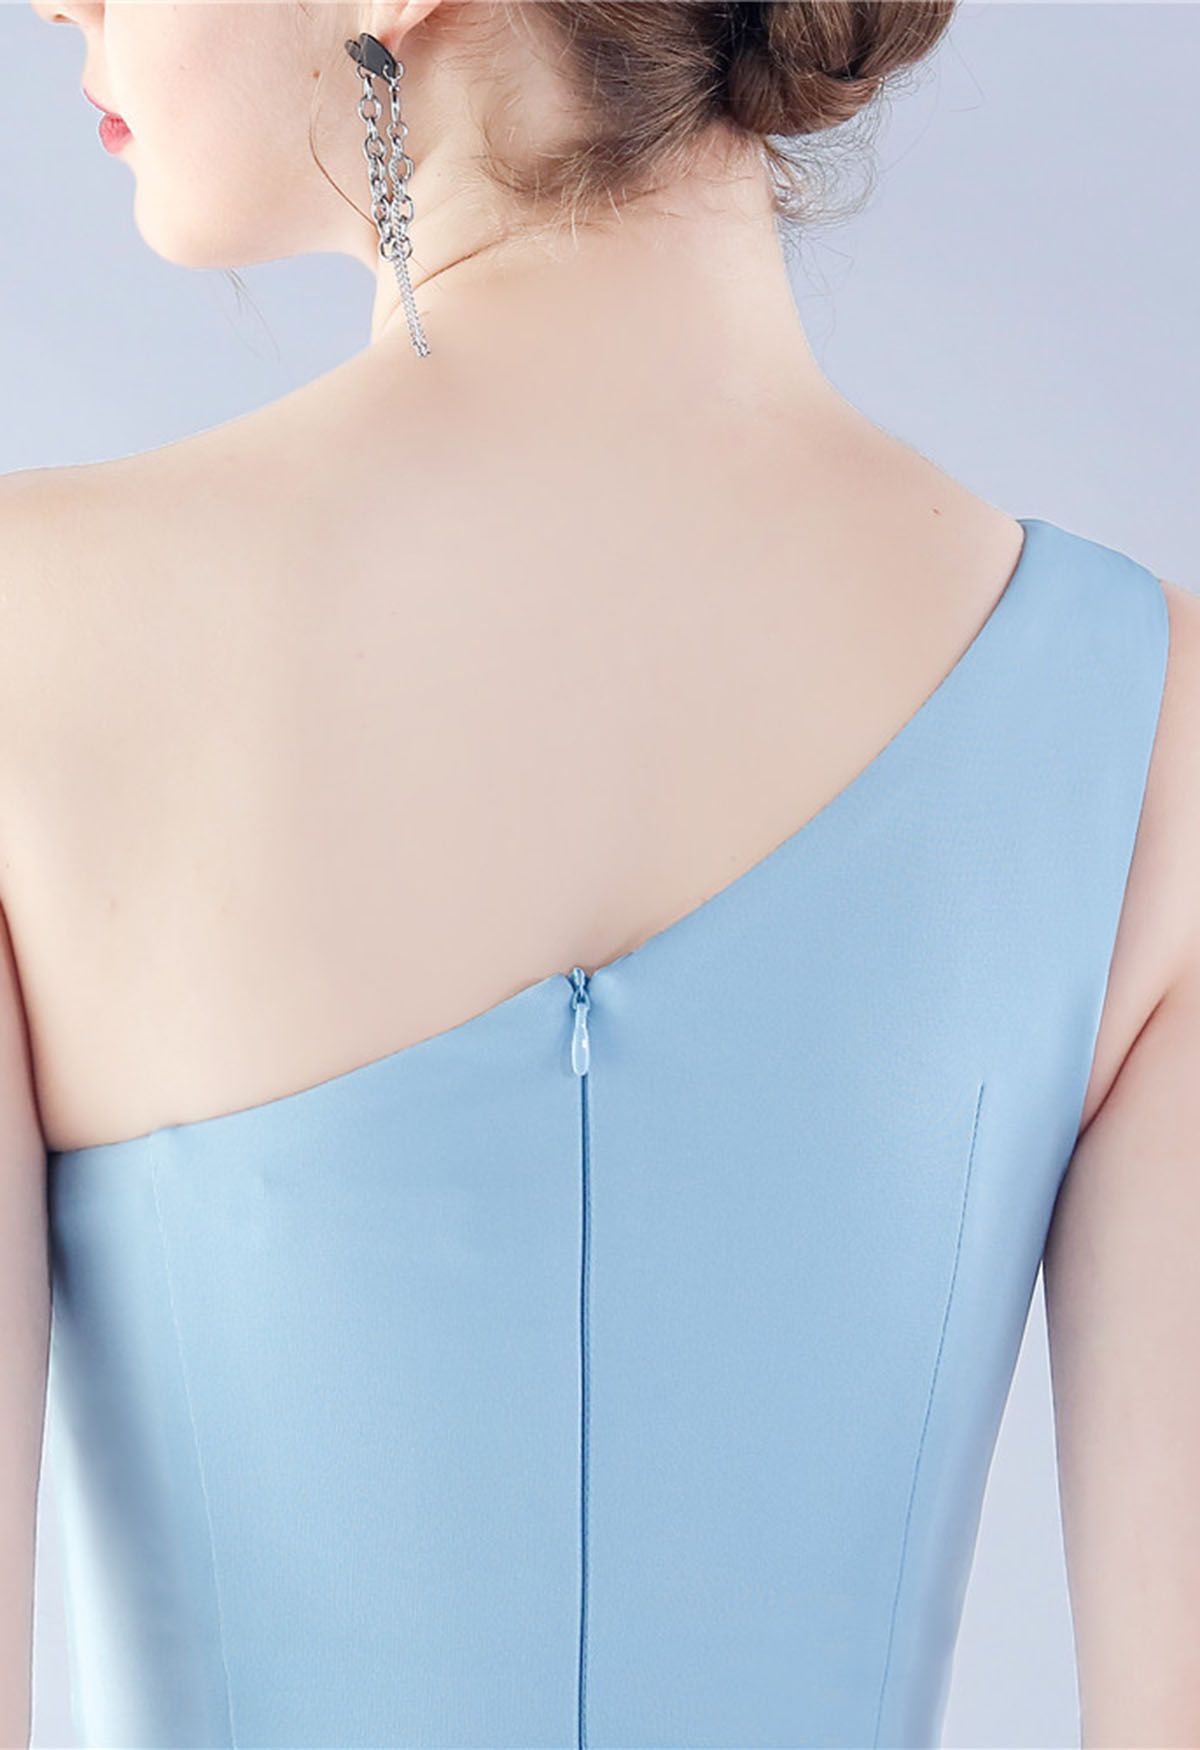 Satin Finished One-Shoulder Slit Mermaid Gown in Baby Blue